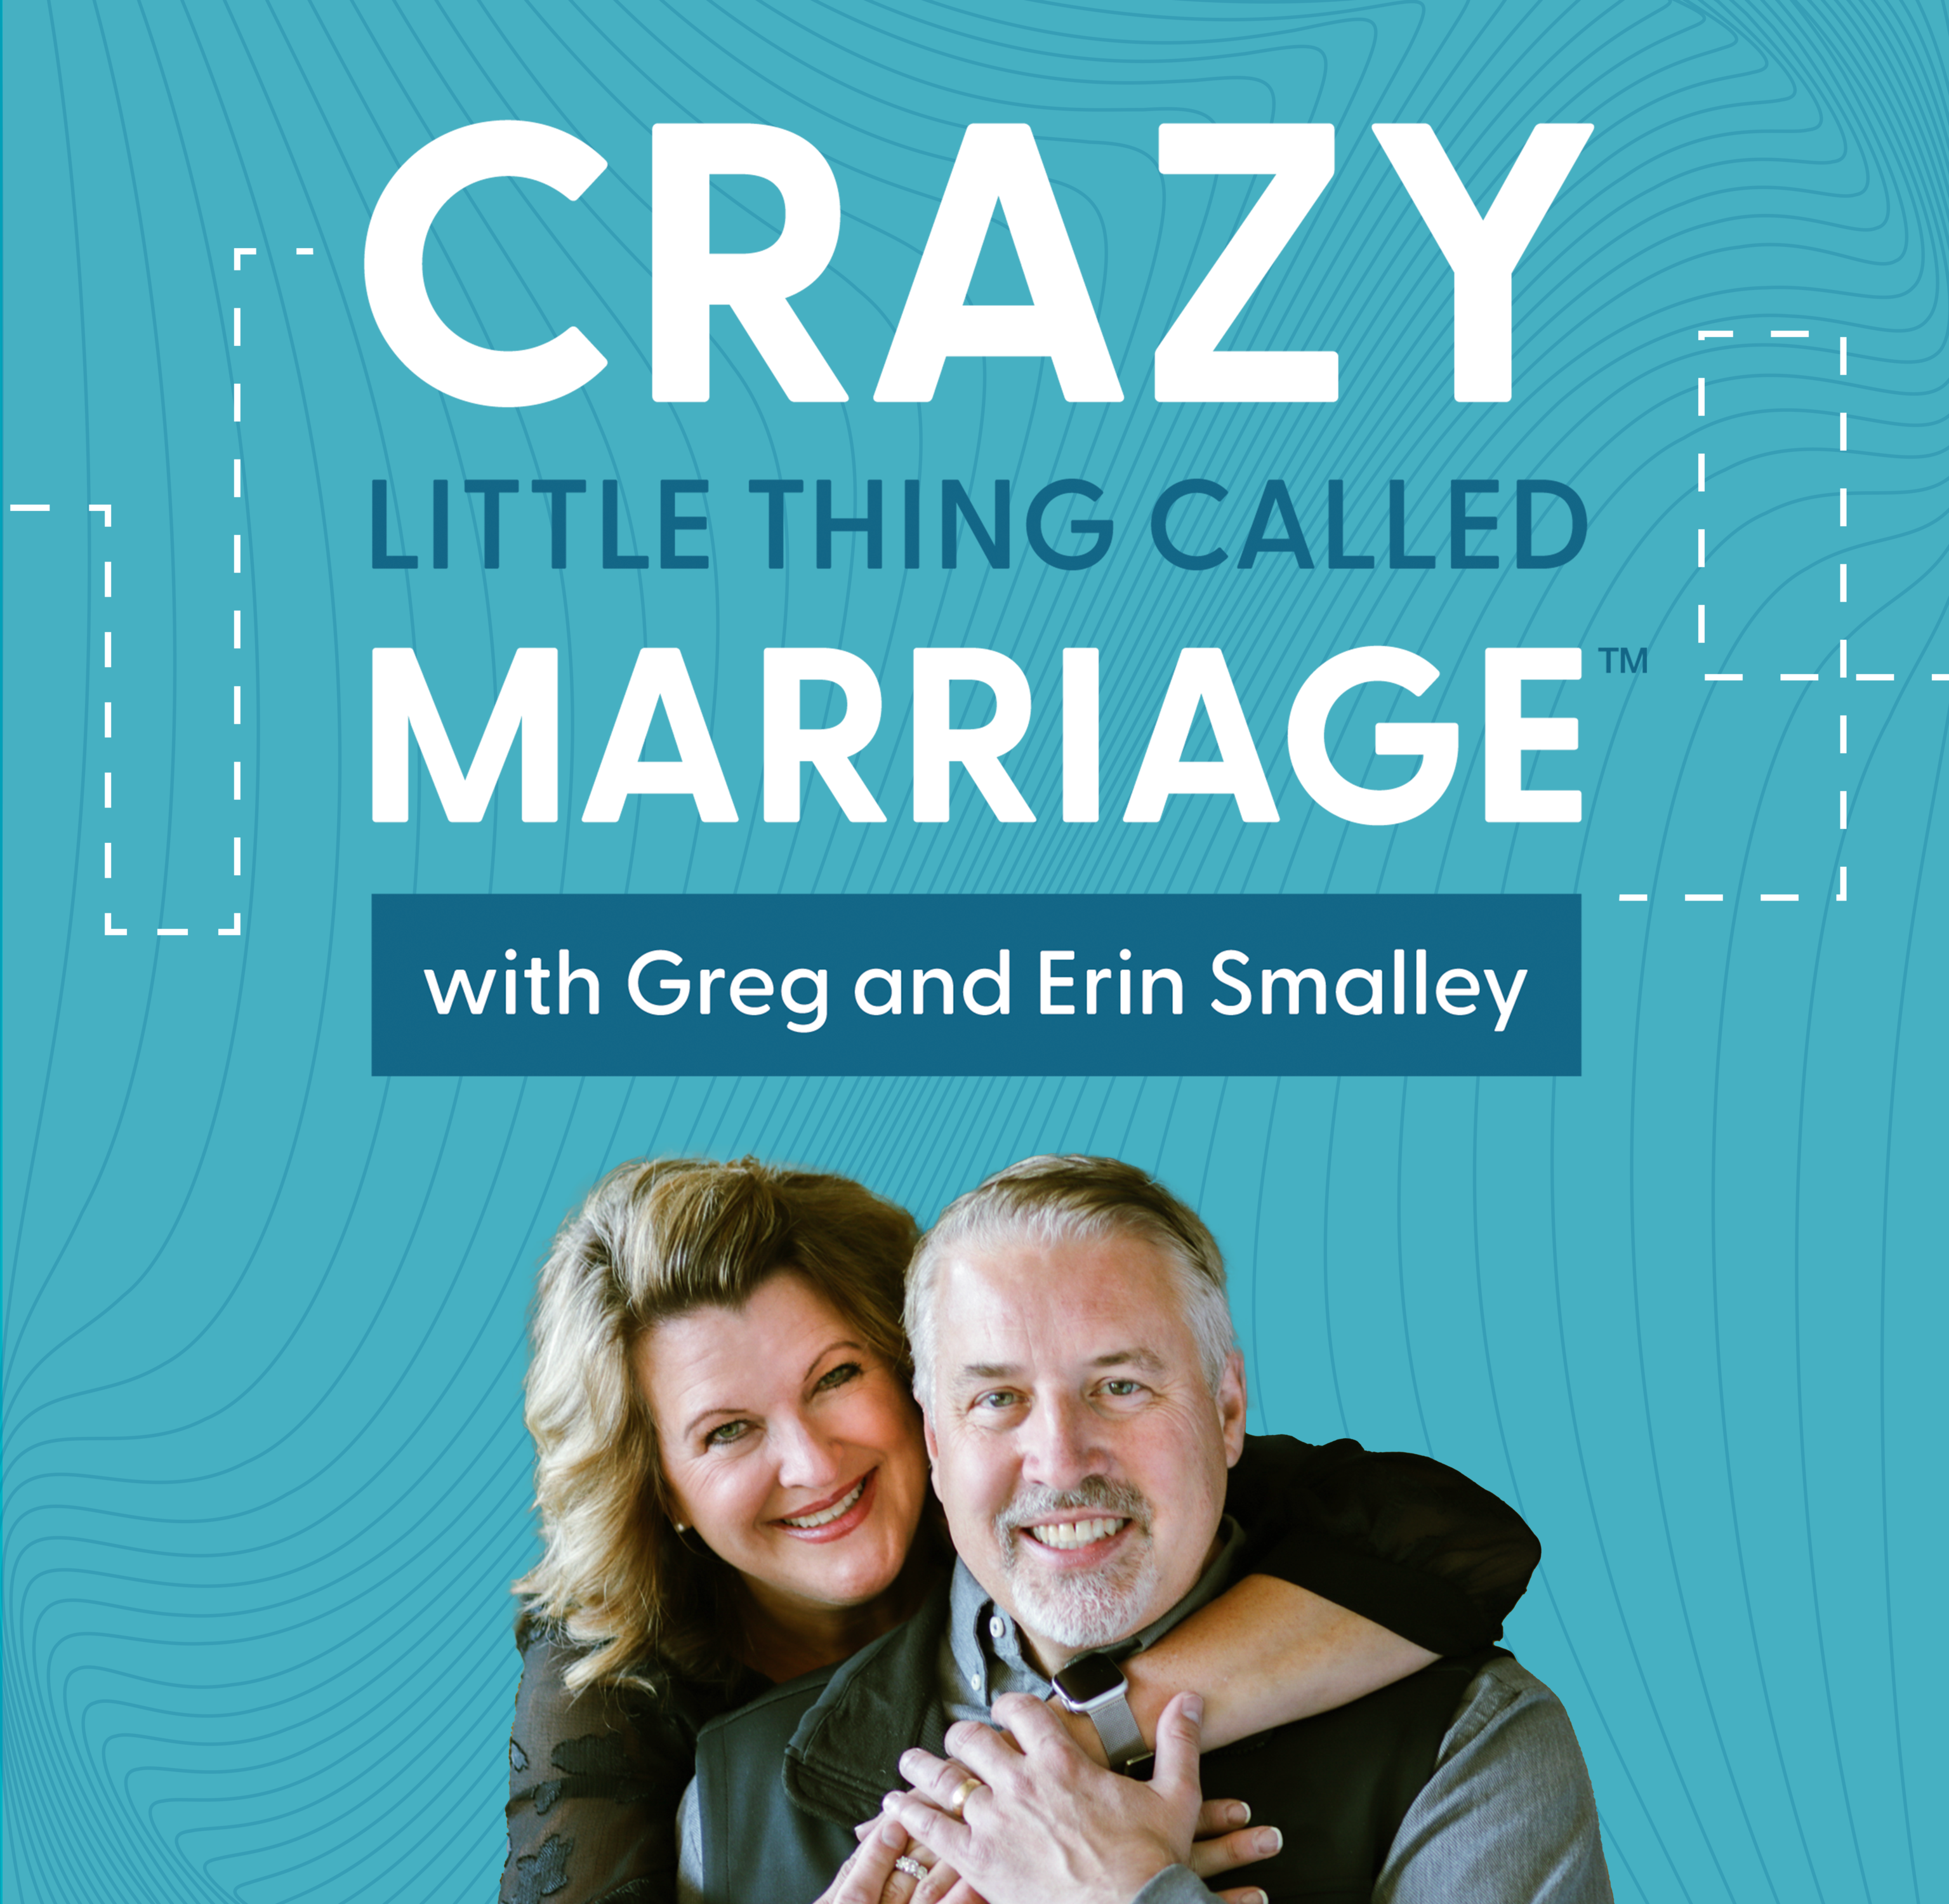 Brad and Marilyn Rhoads: Have a Healthy Marriage through Weekly Marriage Dates